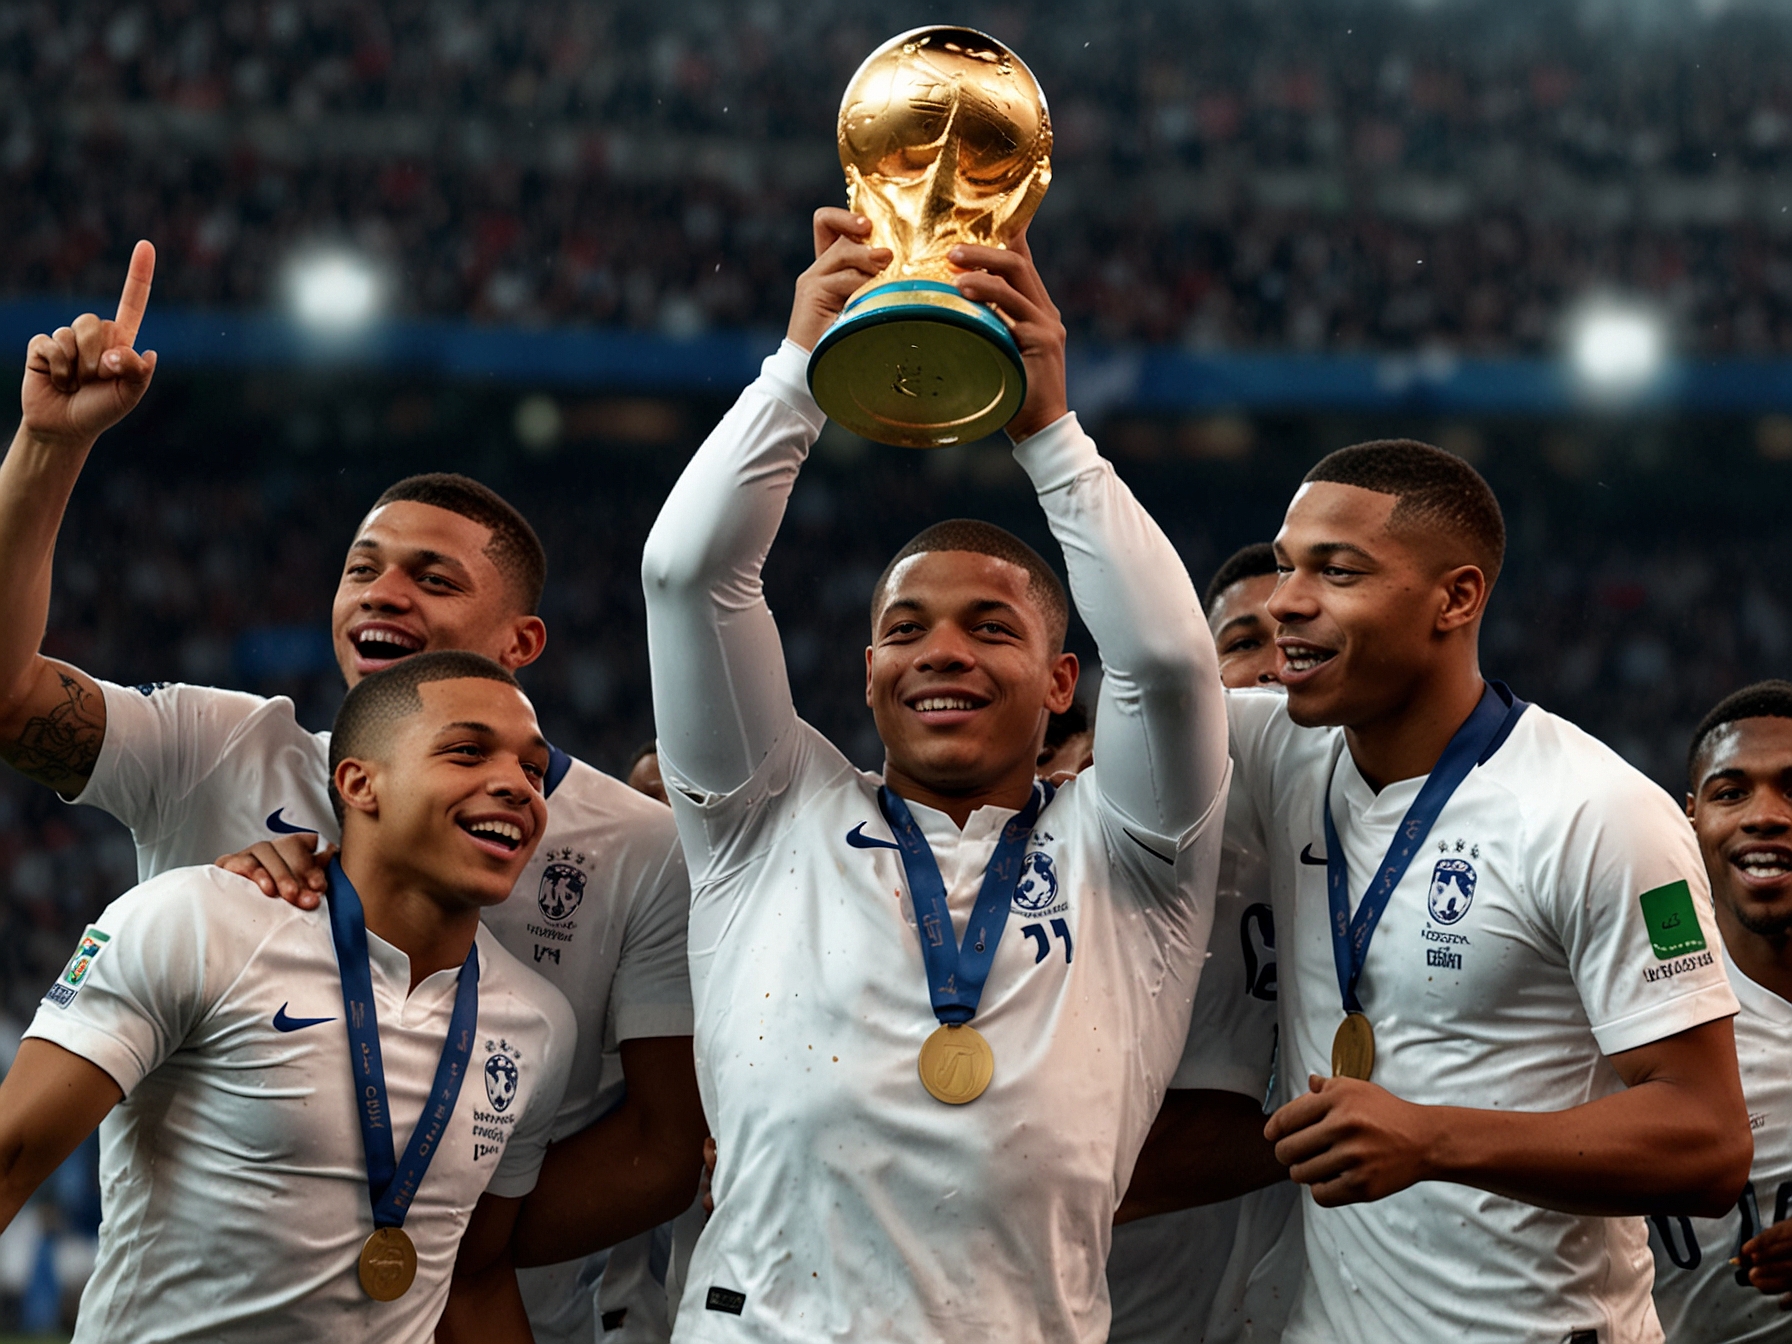 A depiction of Kylian Mbappe lifting the World Cup trophy with his French teammates in 2018, highlighting his pivotal role and remarkable goal in the final against Croatia.